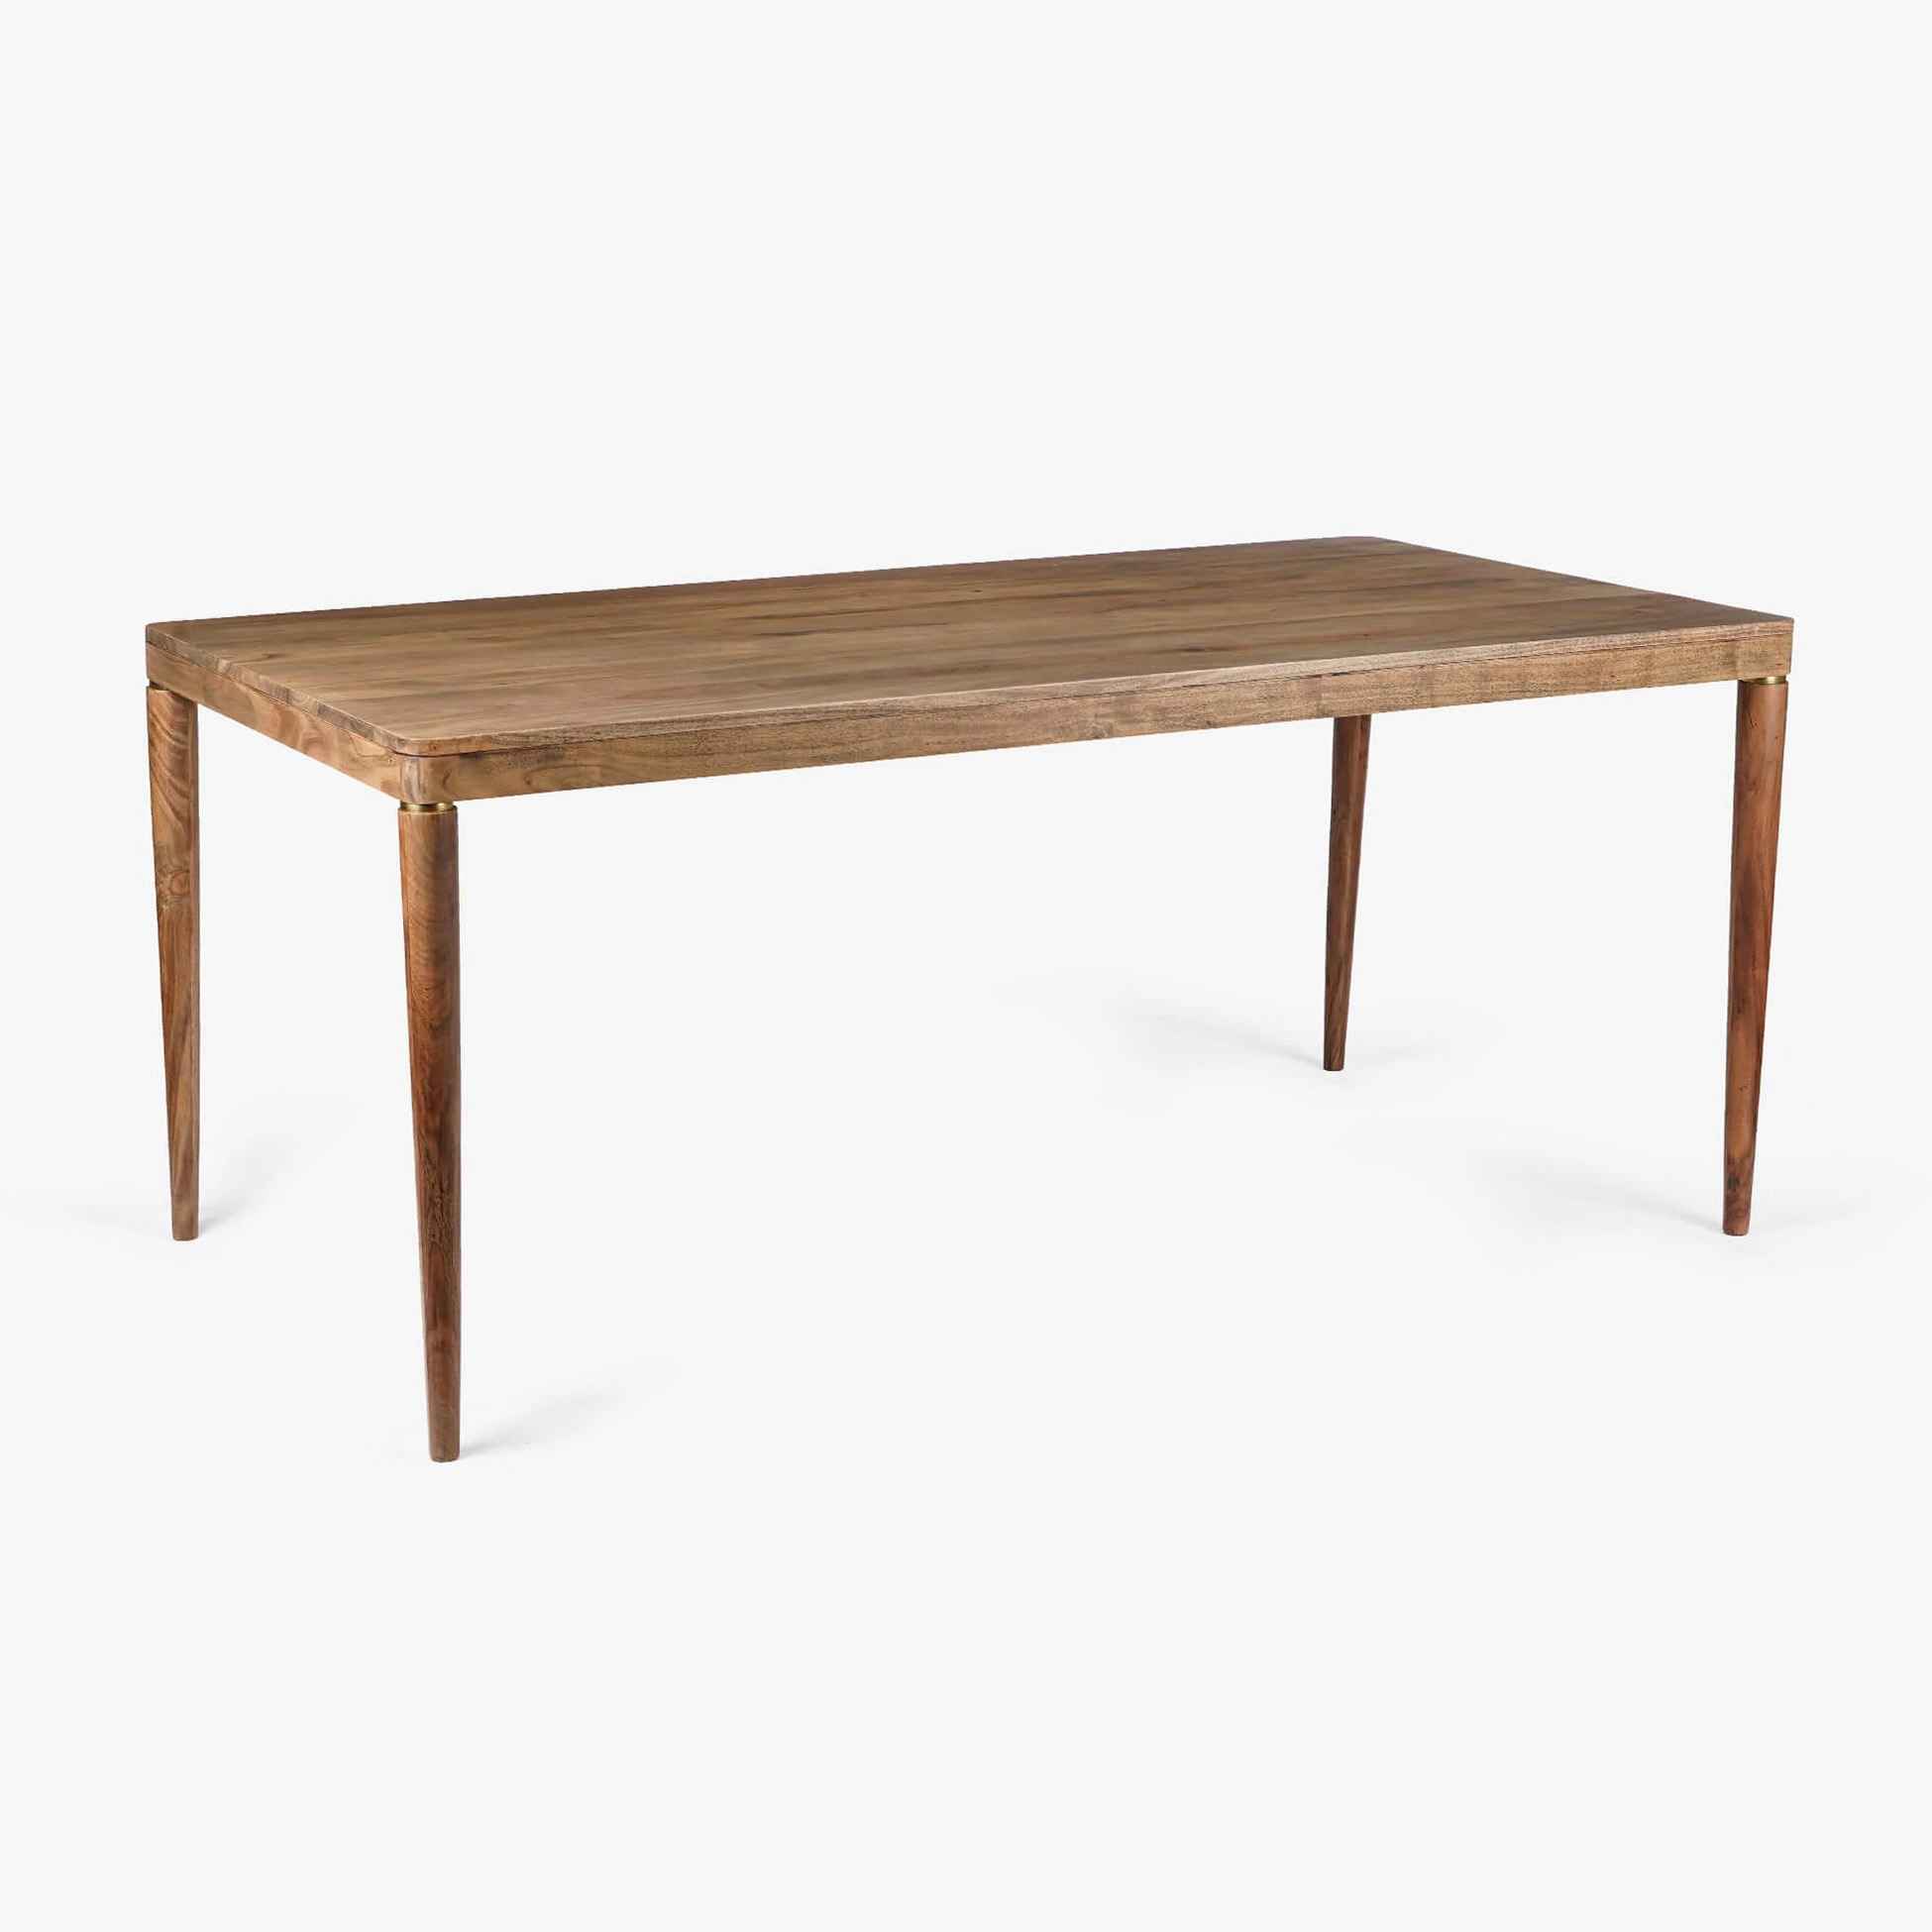 Sugoi Dining Table Round